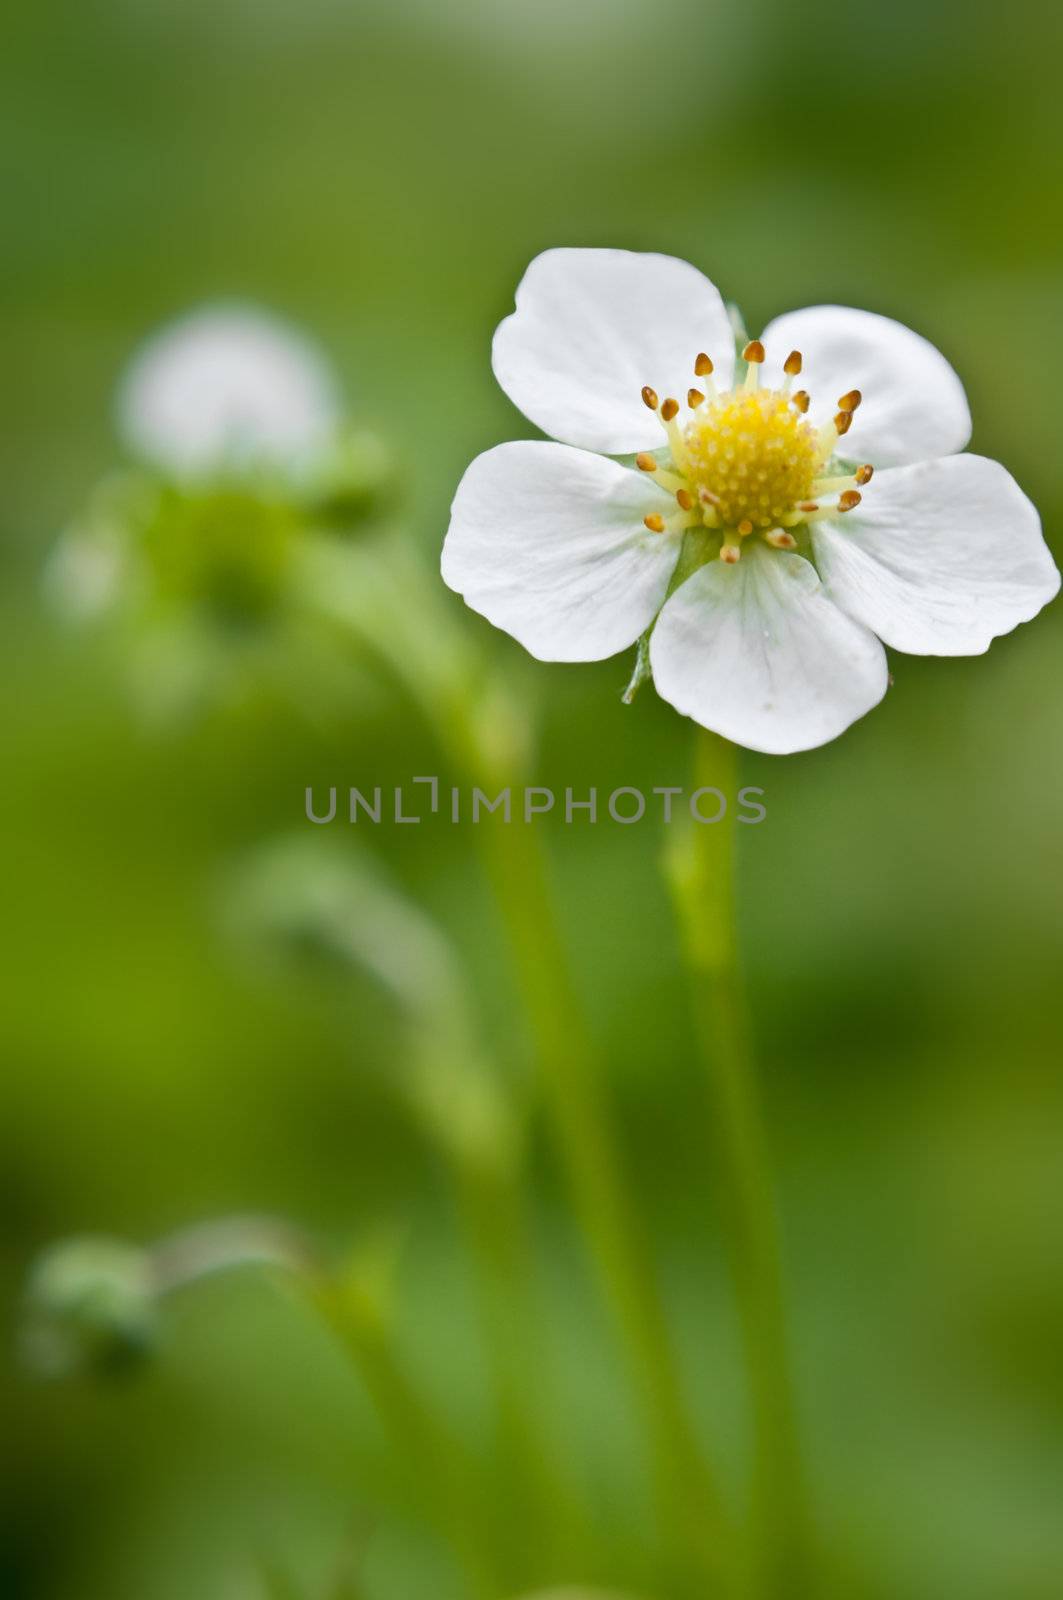 A single white strawberry plant flower with blurred background